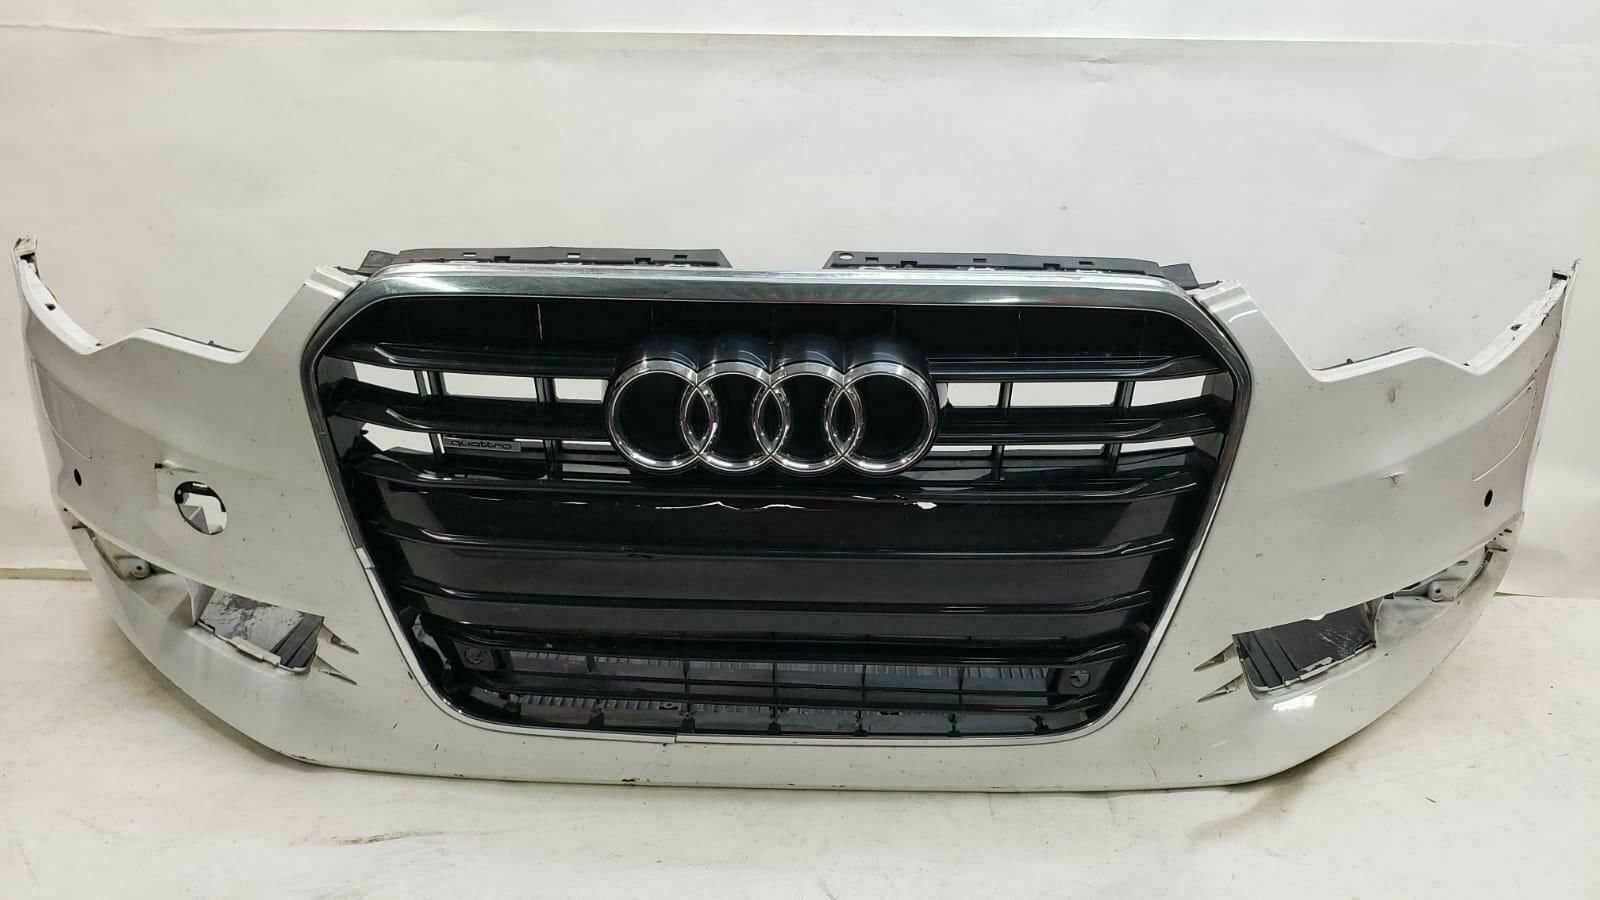 2012-2015 AUDI A6 FRONT BUMPER COVER WITH GRILLE 4G0807233/4G0807550J OEM